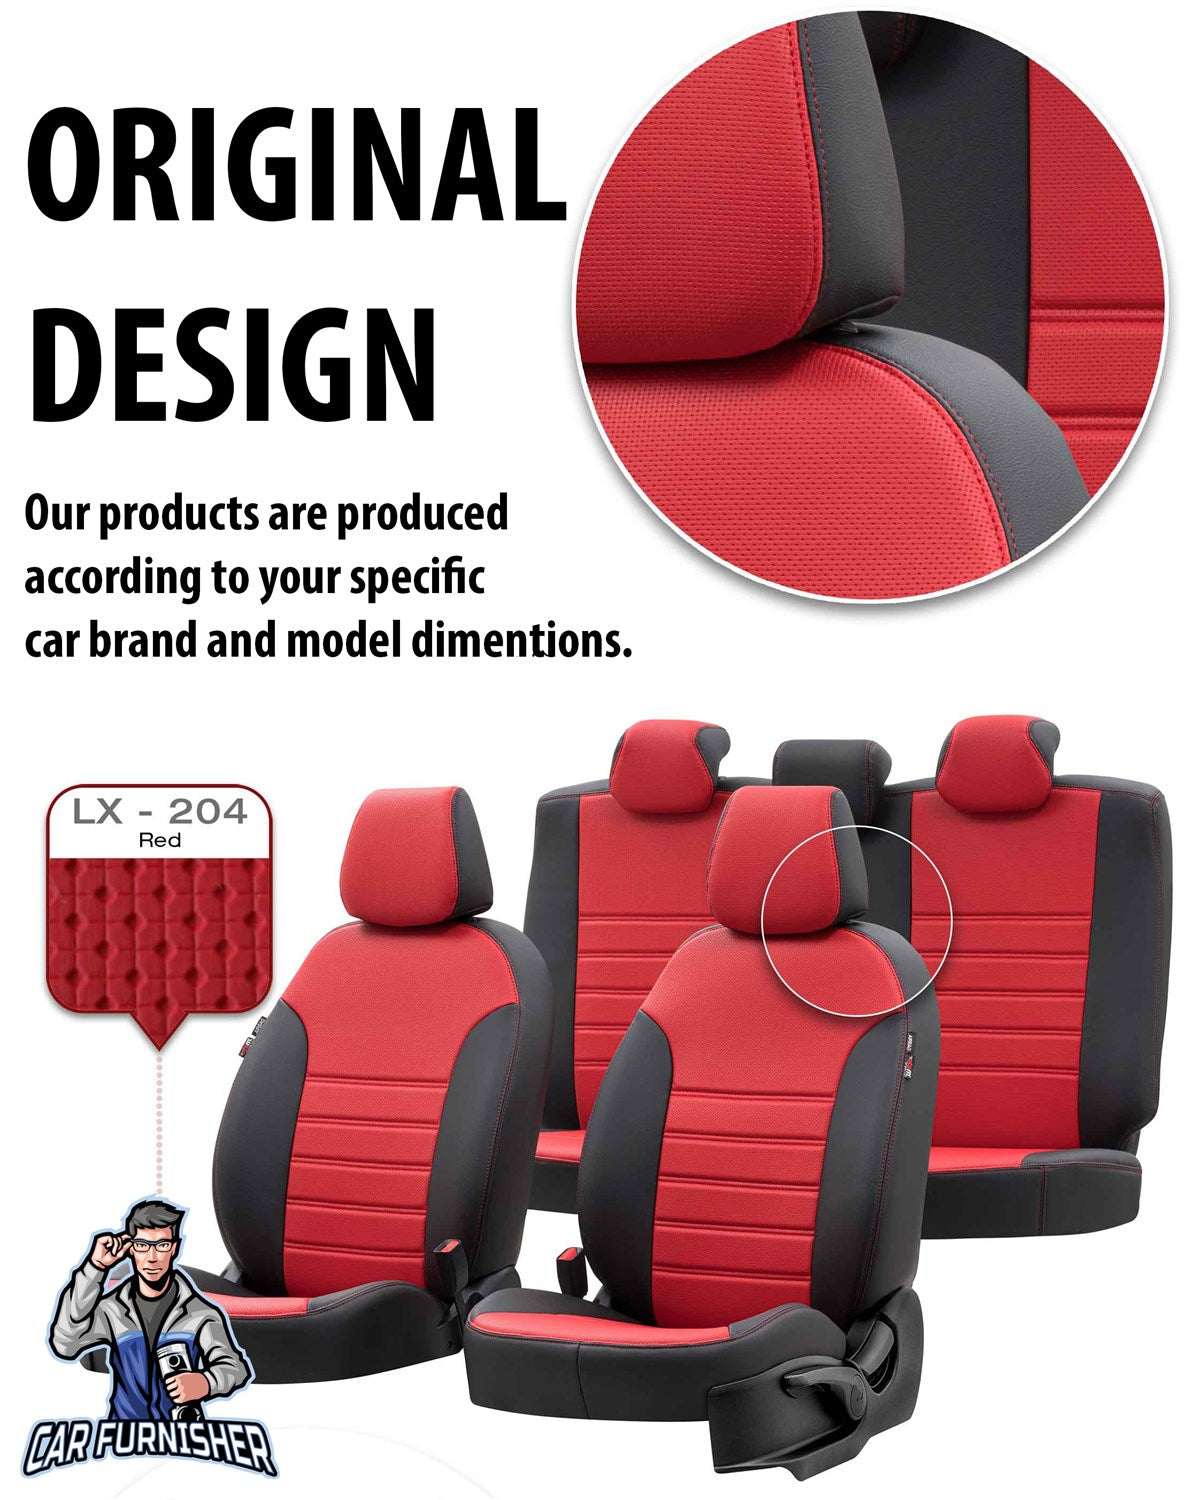 Mercedes S Class Seat Covers New York Leather Design Red Leather